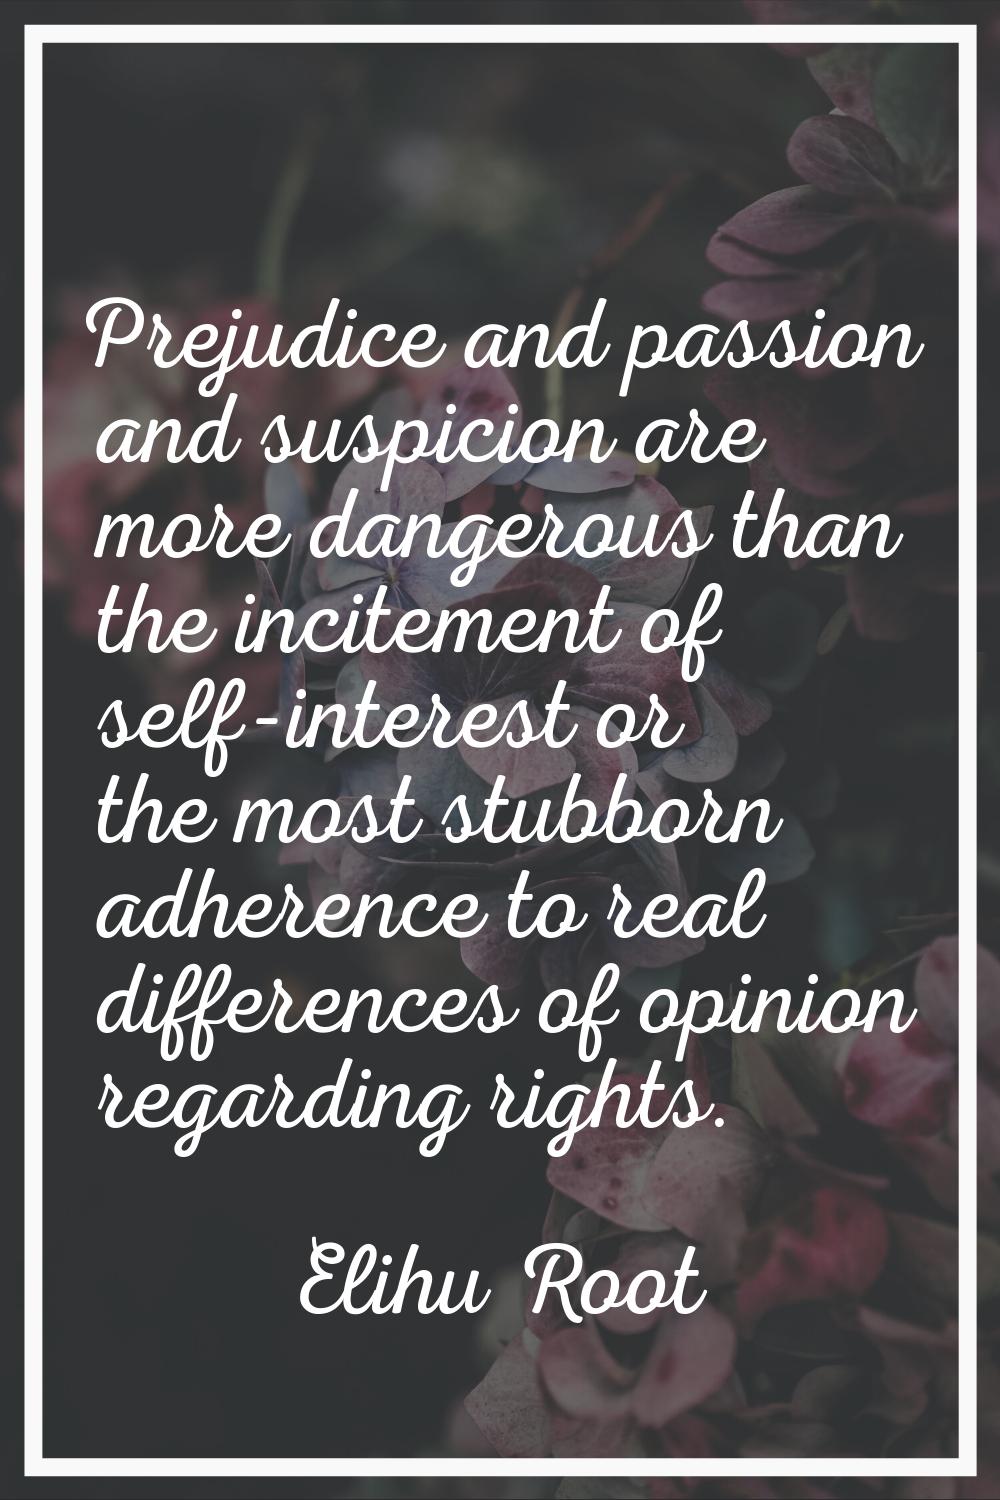 Prejudice and passion and suspicion are more dangerous than the incitement of self-interest or the 